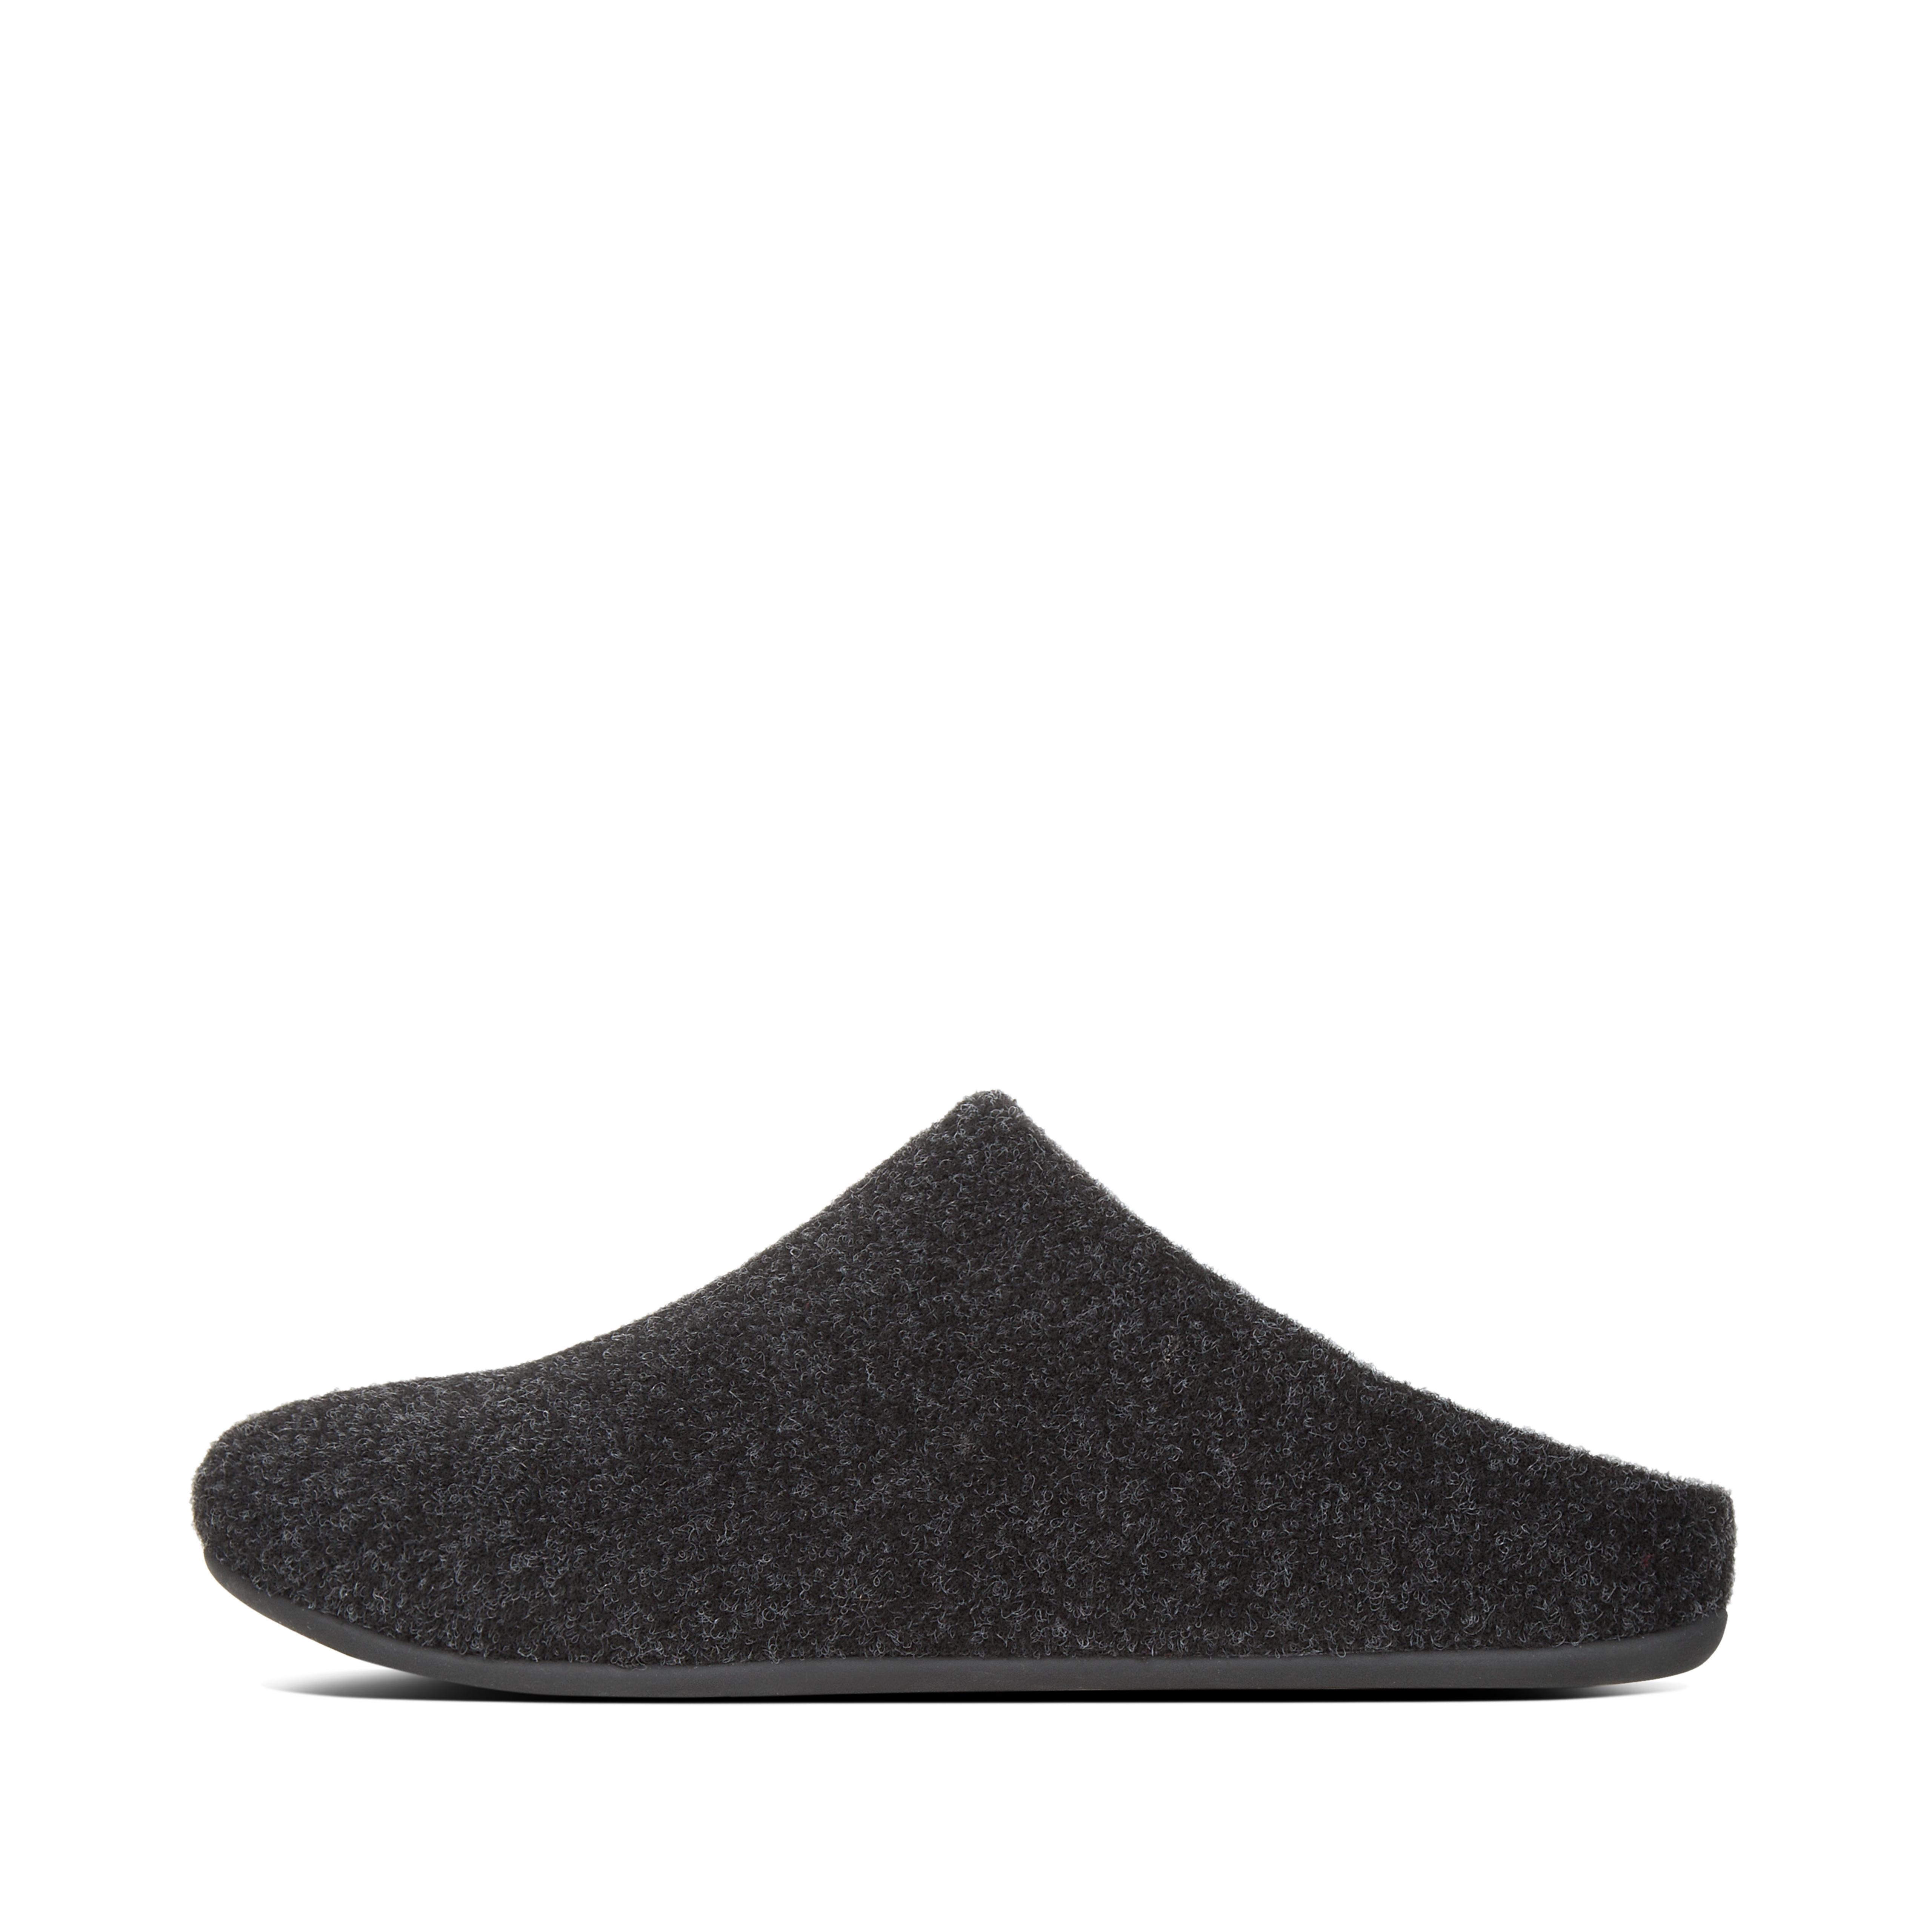 fitflop slippers womens uk